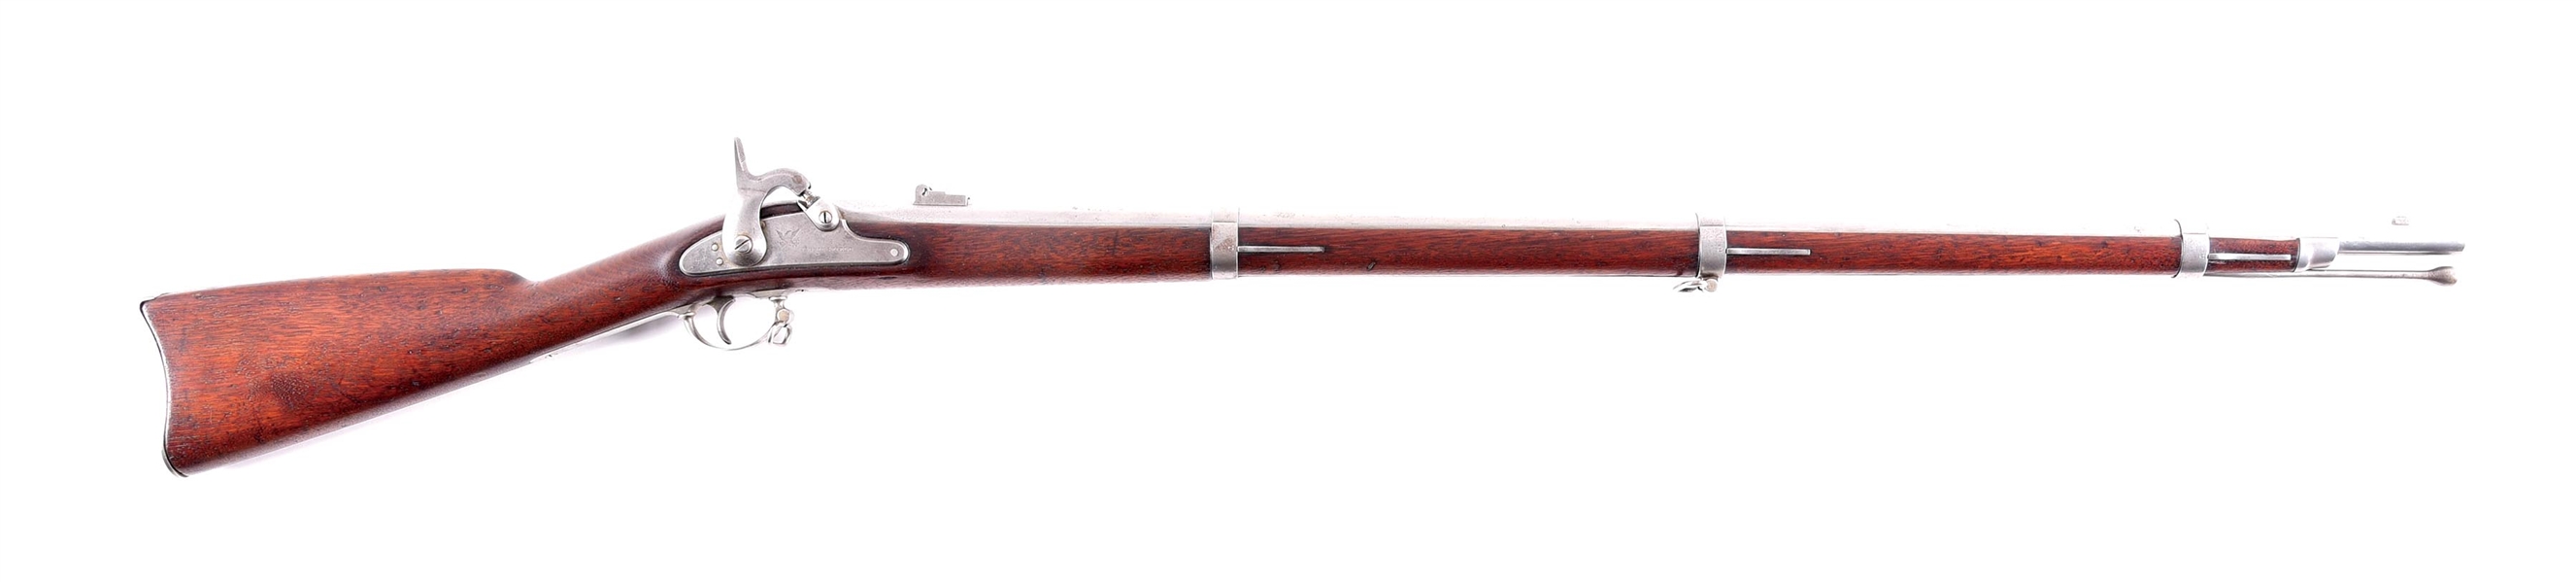 (A) SPRINGFIELD MODEL 1861 PERCUSSION RIFLED MUSKET.